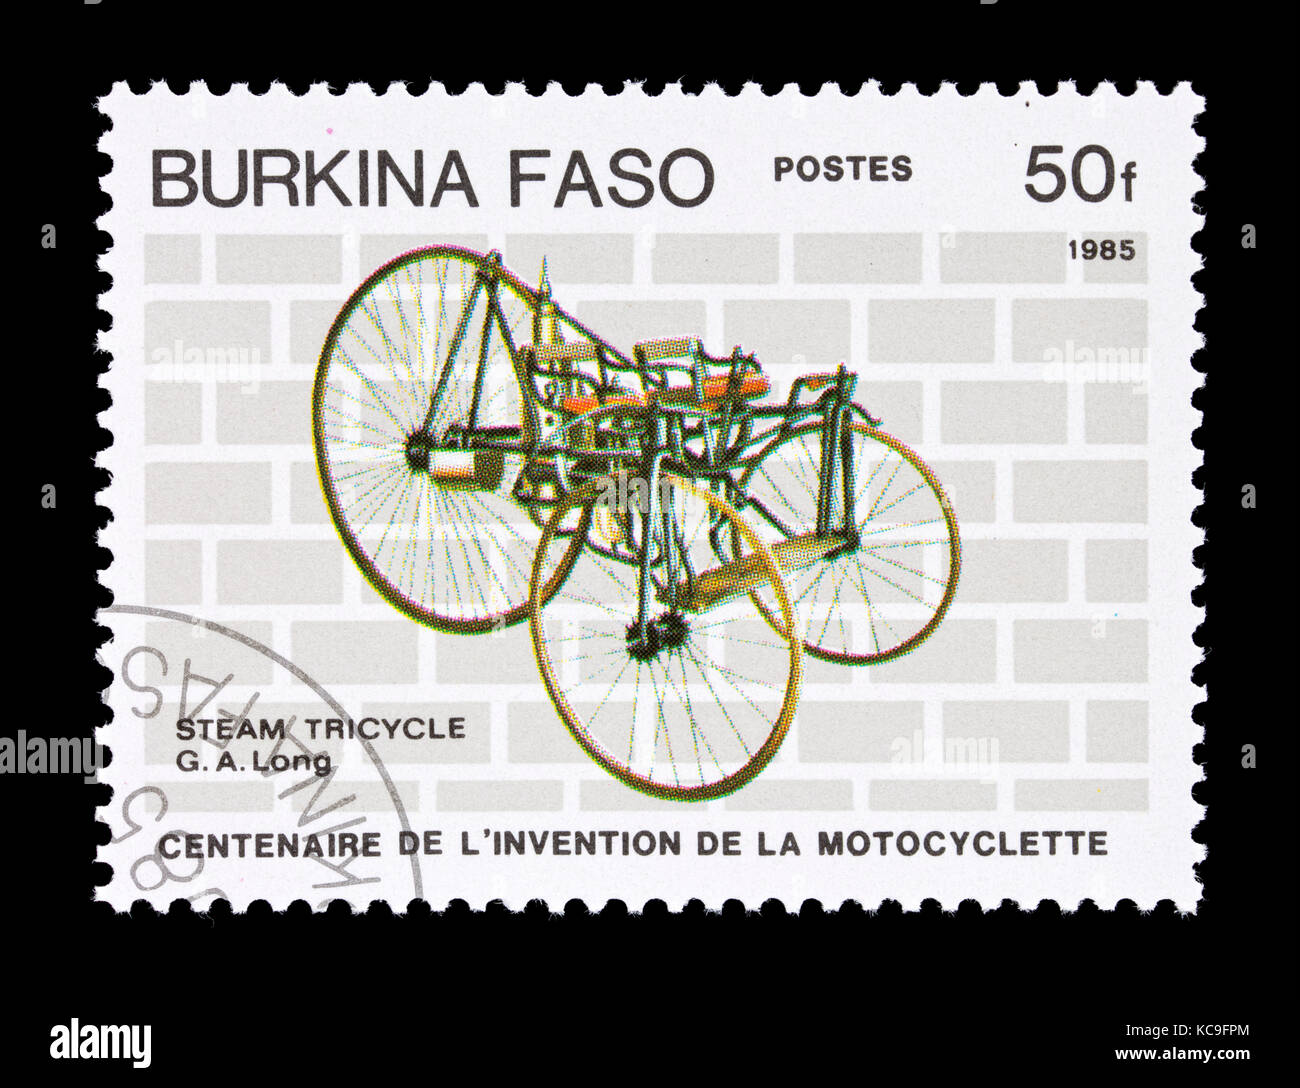 Postage stamp from Burkina Faso depicting a G. A. Long steam motorcycle, centennial of the invention of the motorcycle. Stock Photo